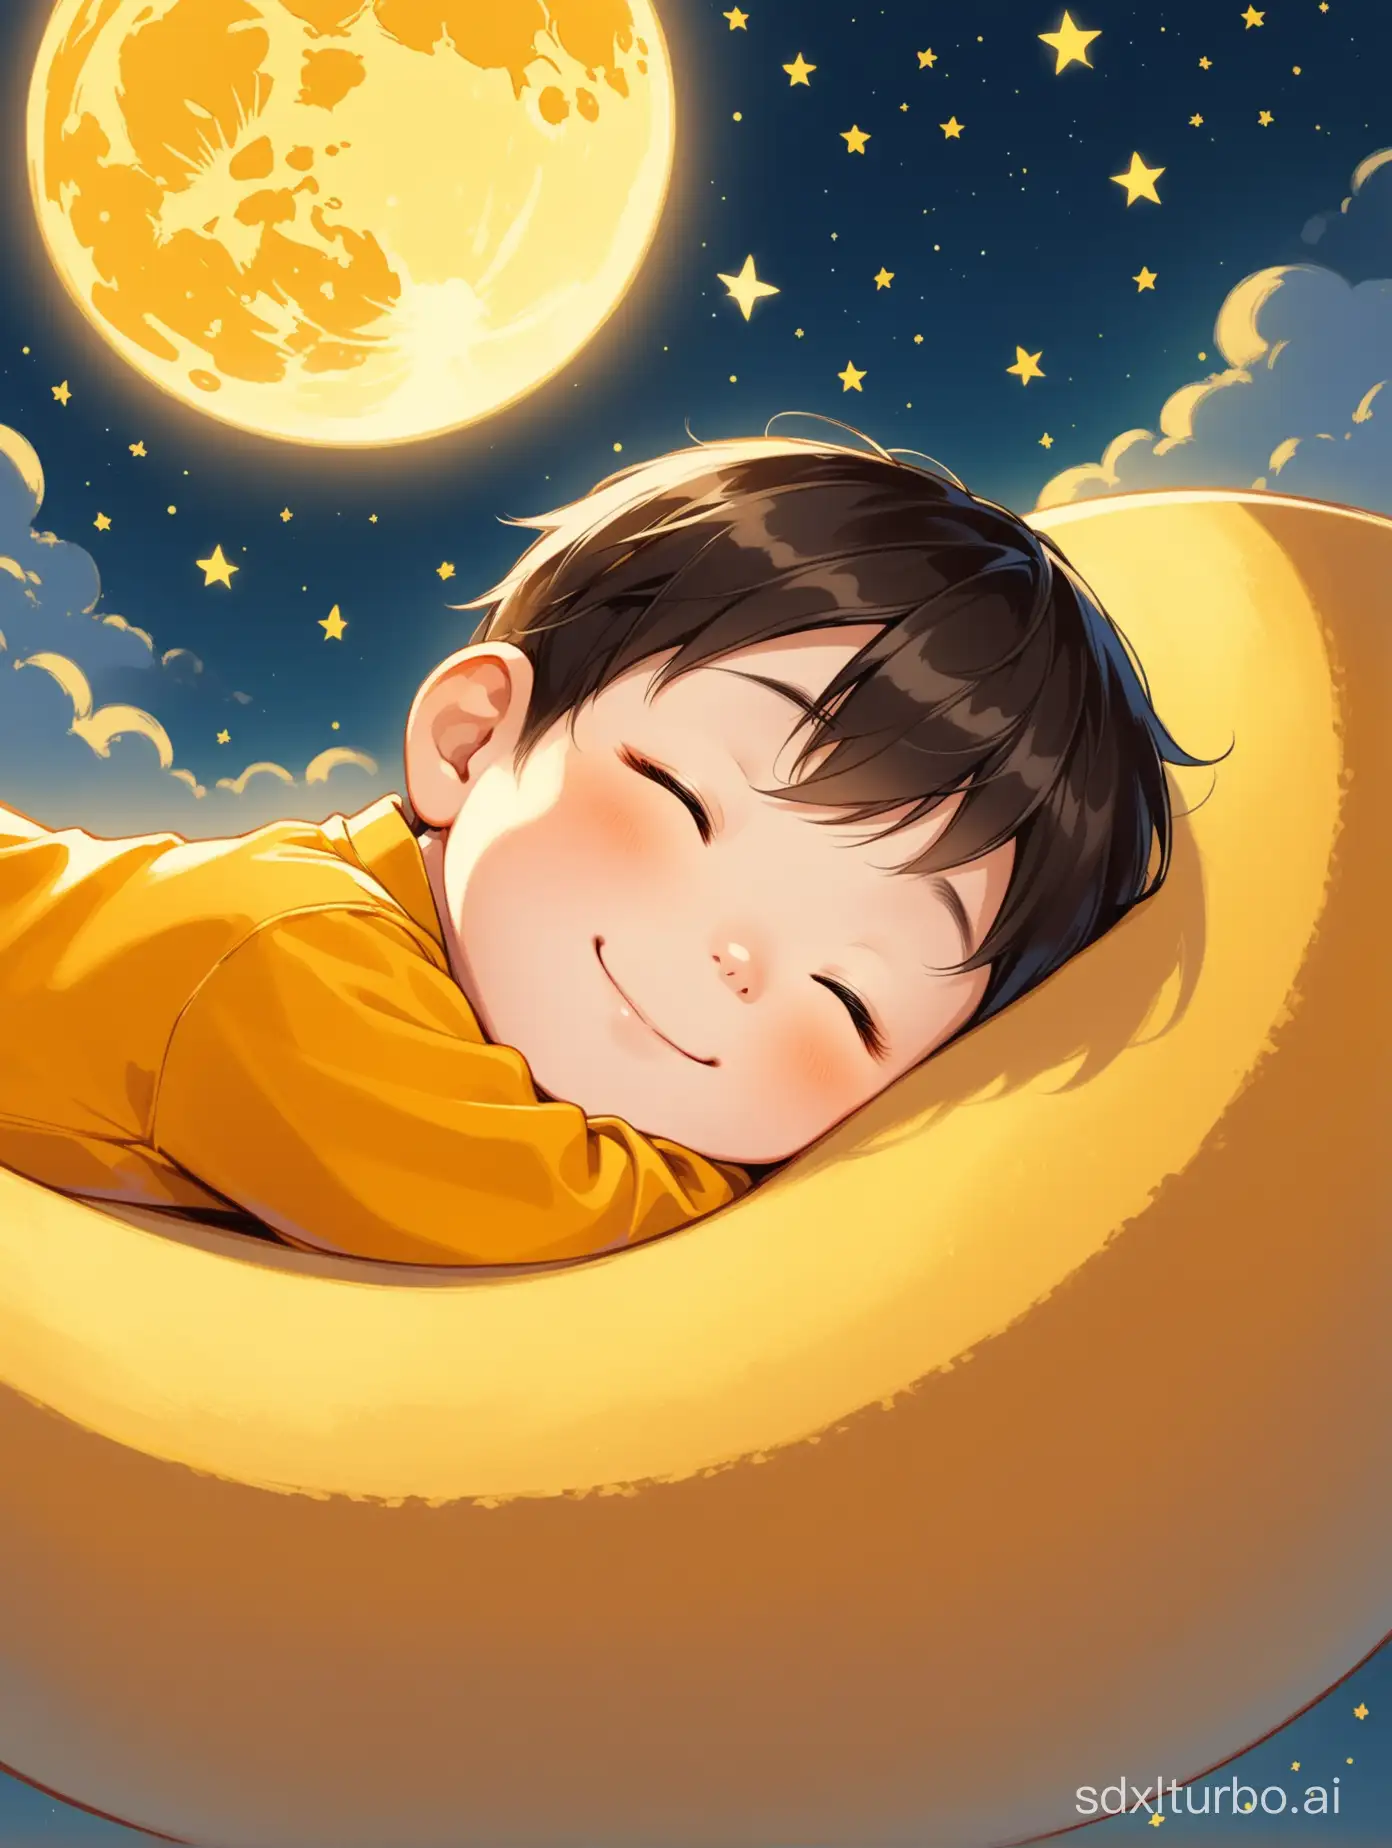 Adorable-Chinese-Boy-Sleeping-Peacefully-on-Crescent-Moon